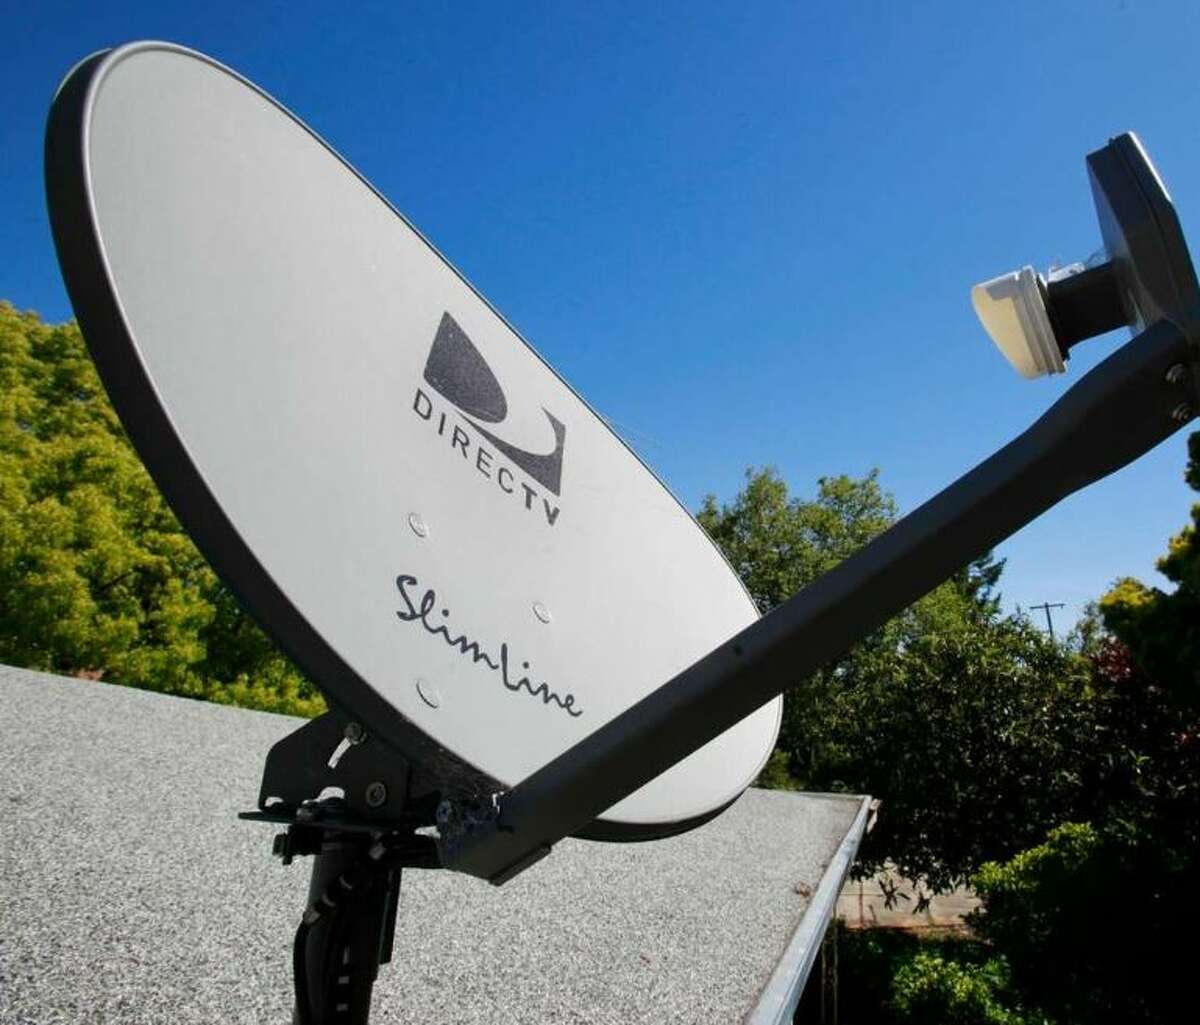 Capital Region customers of the DirecTV satellite service are facing a Super Bowl blackout over a payment dispute between the satellite firm and owner of the local Fox affiliate.